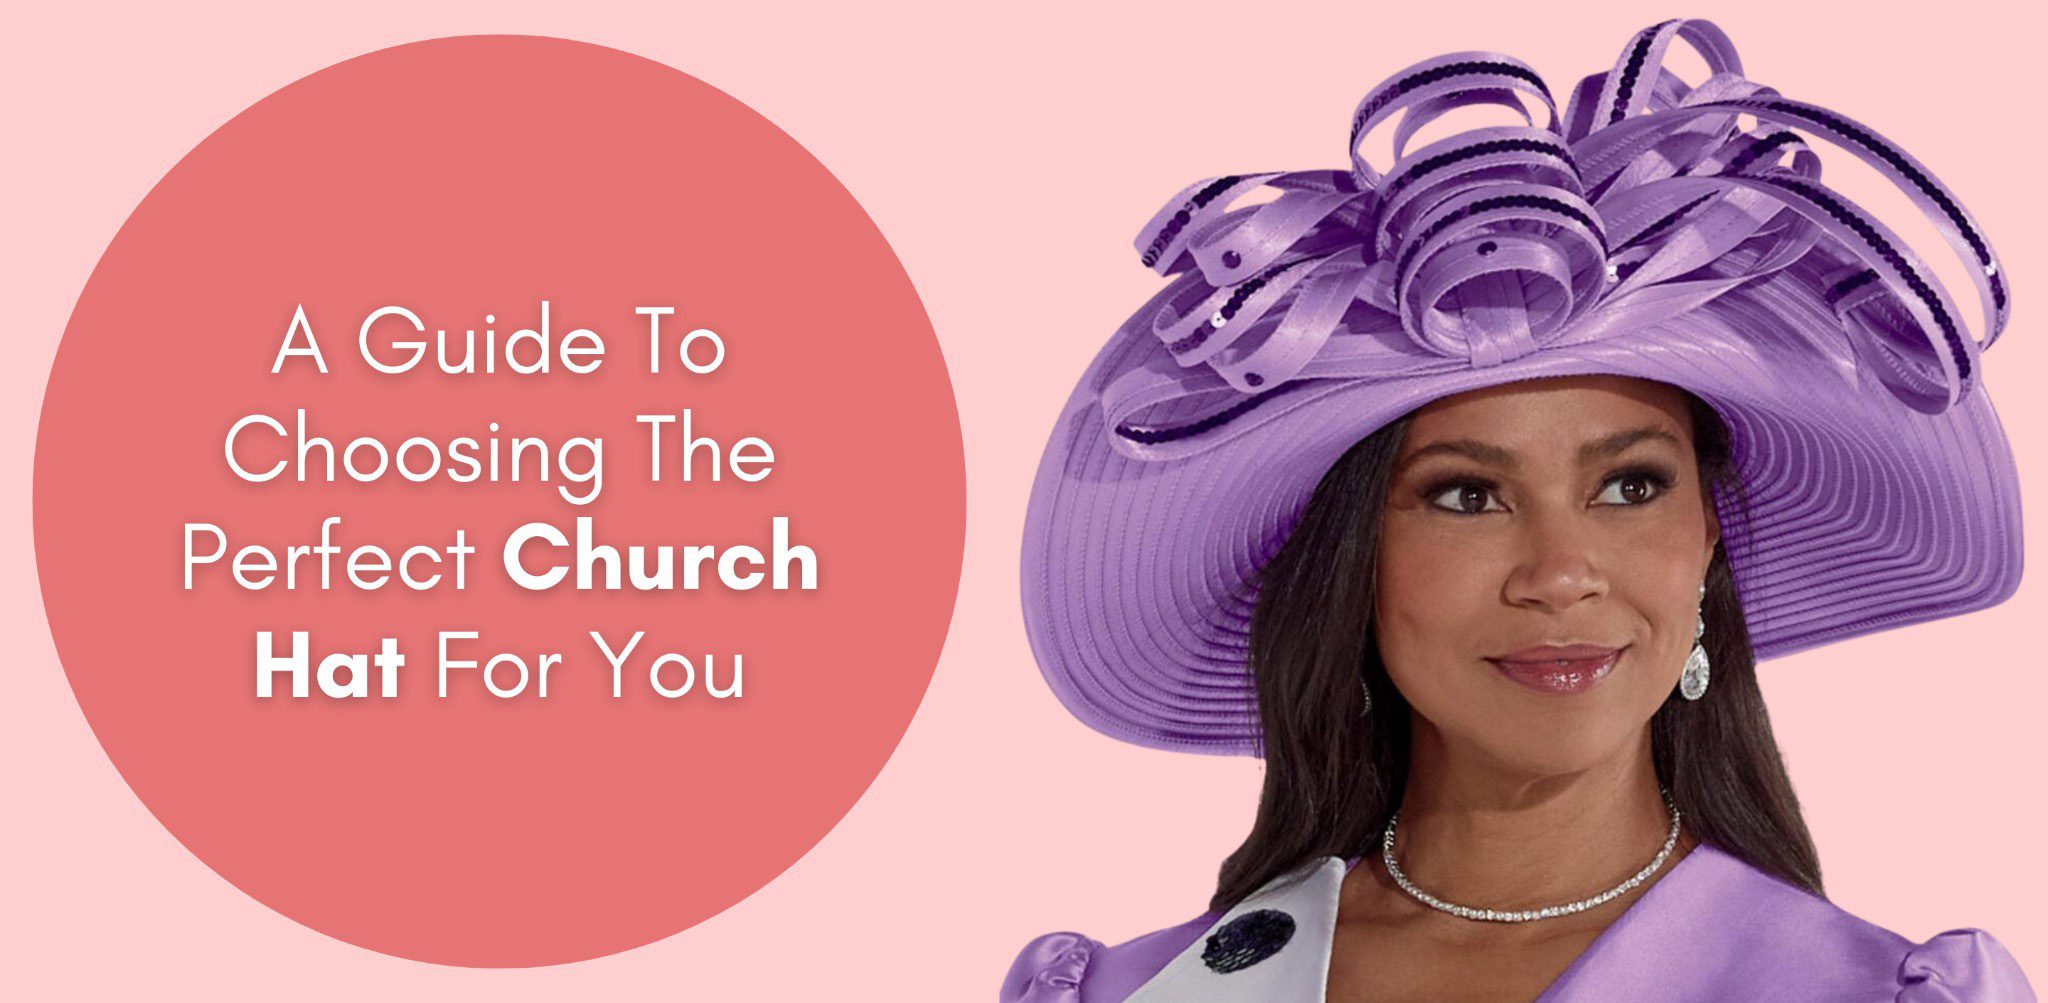 A Guide To Choosing The Perfect Church Hat For You